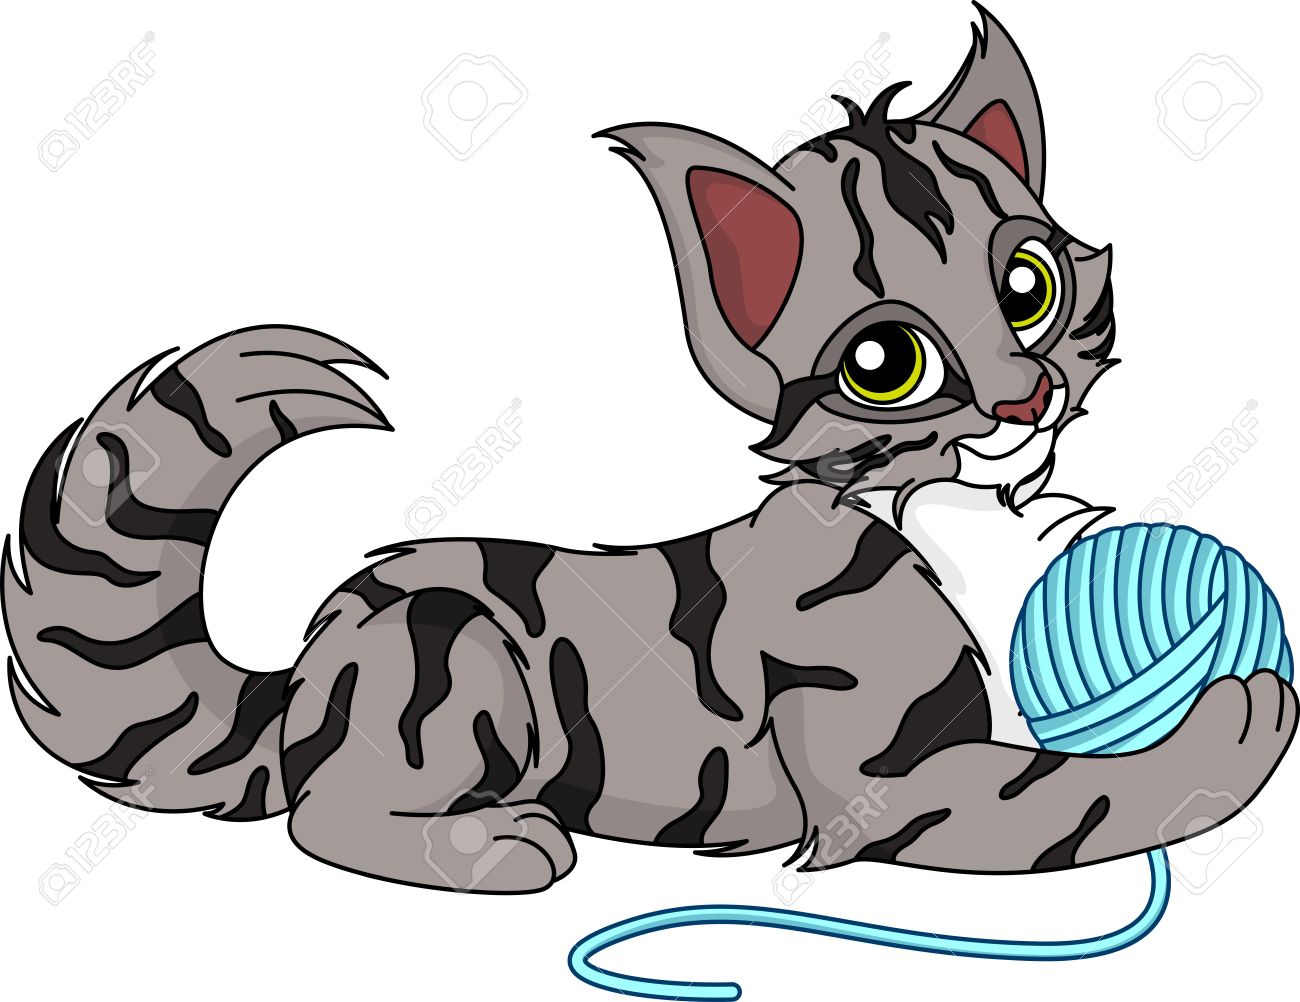 Kitten Playing With Yarn Clipart.